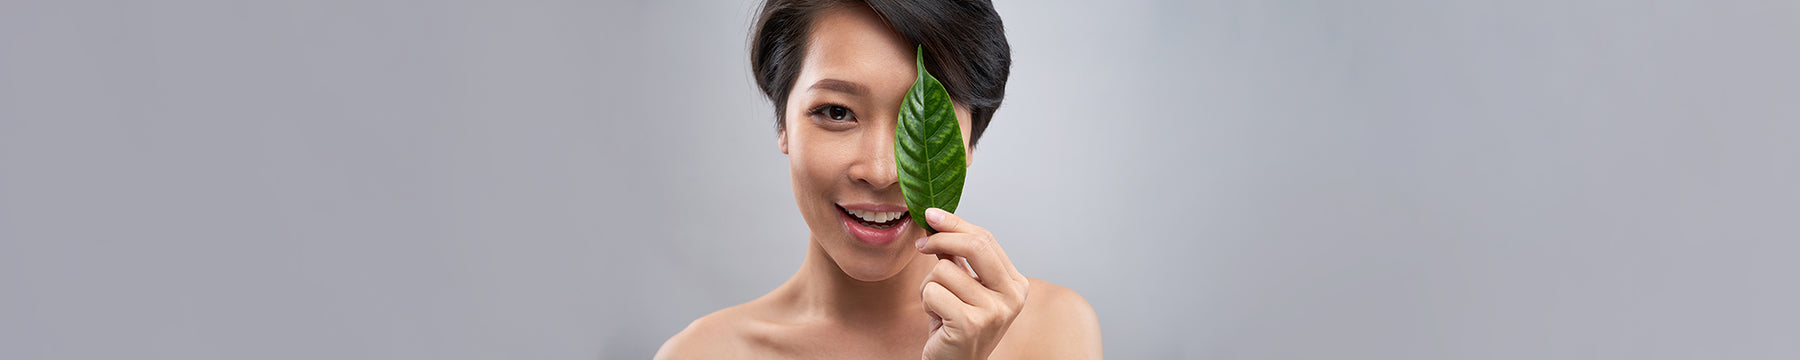 Tea Tree Oil For Acne: Does It Help?